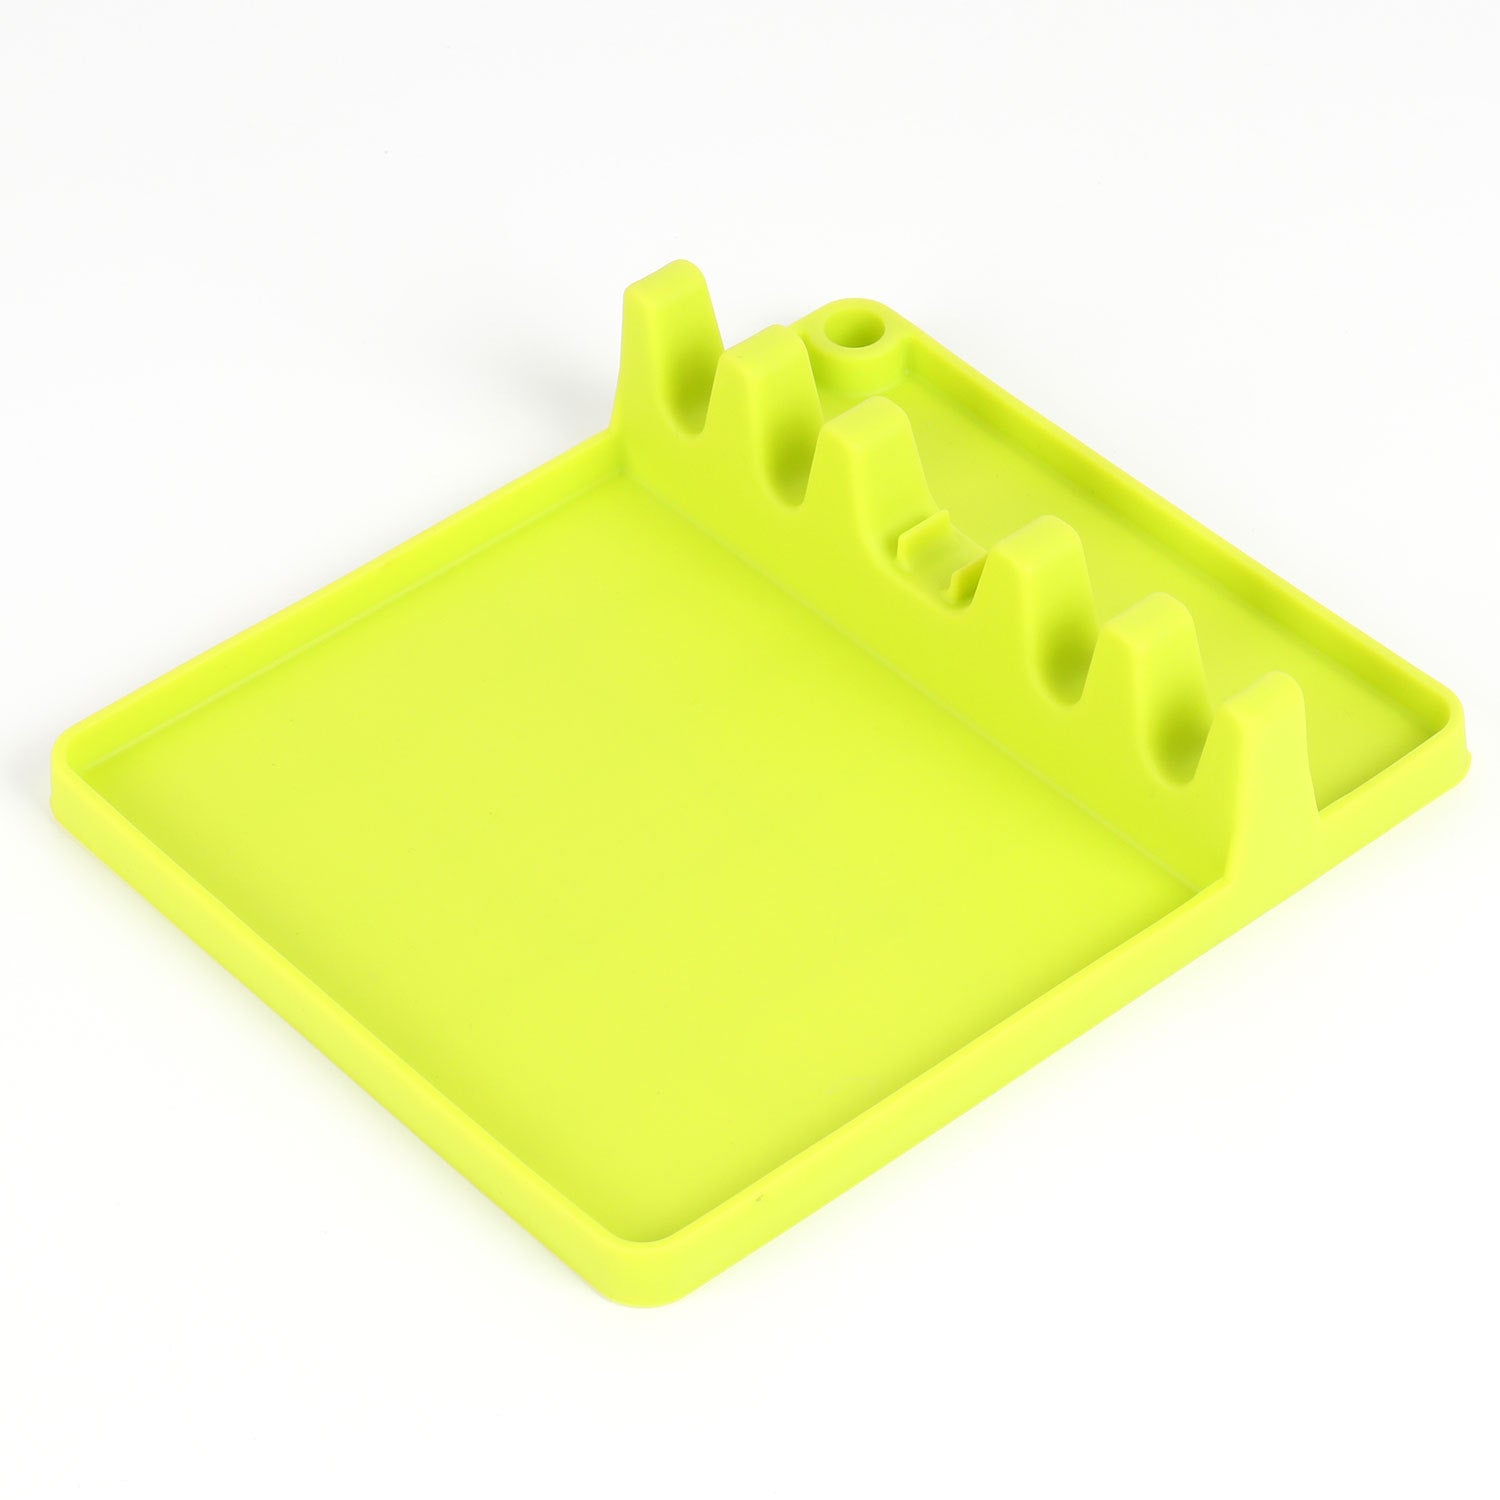 Two-In-One Silicone Spoon Holder, Spoon Holder, Spoon Holder